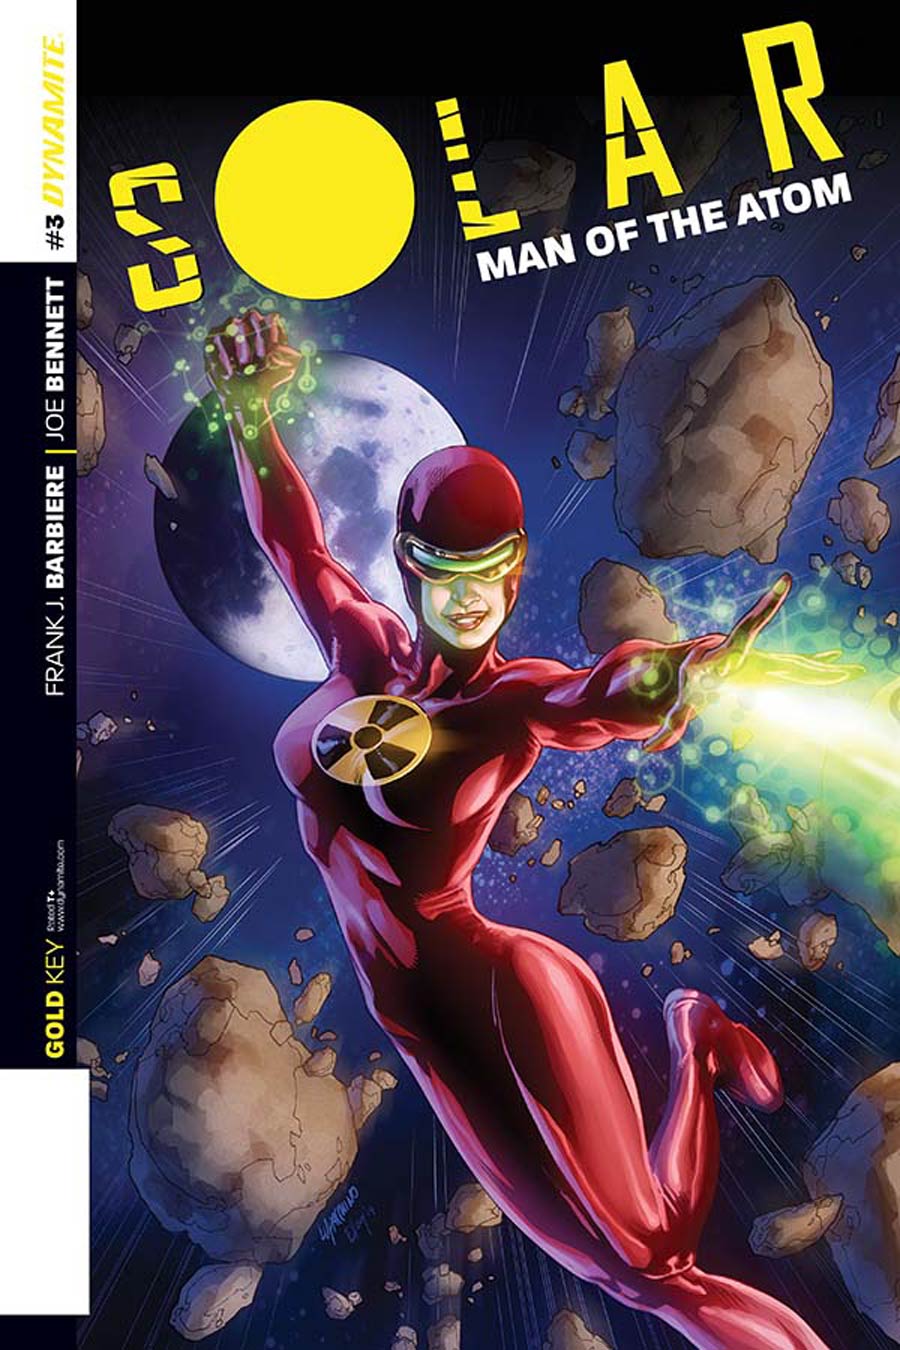 Solar Man Of The Atom Vol 2 #3 Cover C Incentive Emanuela Lupacchino Variant Cover